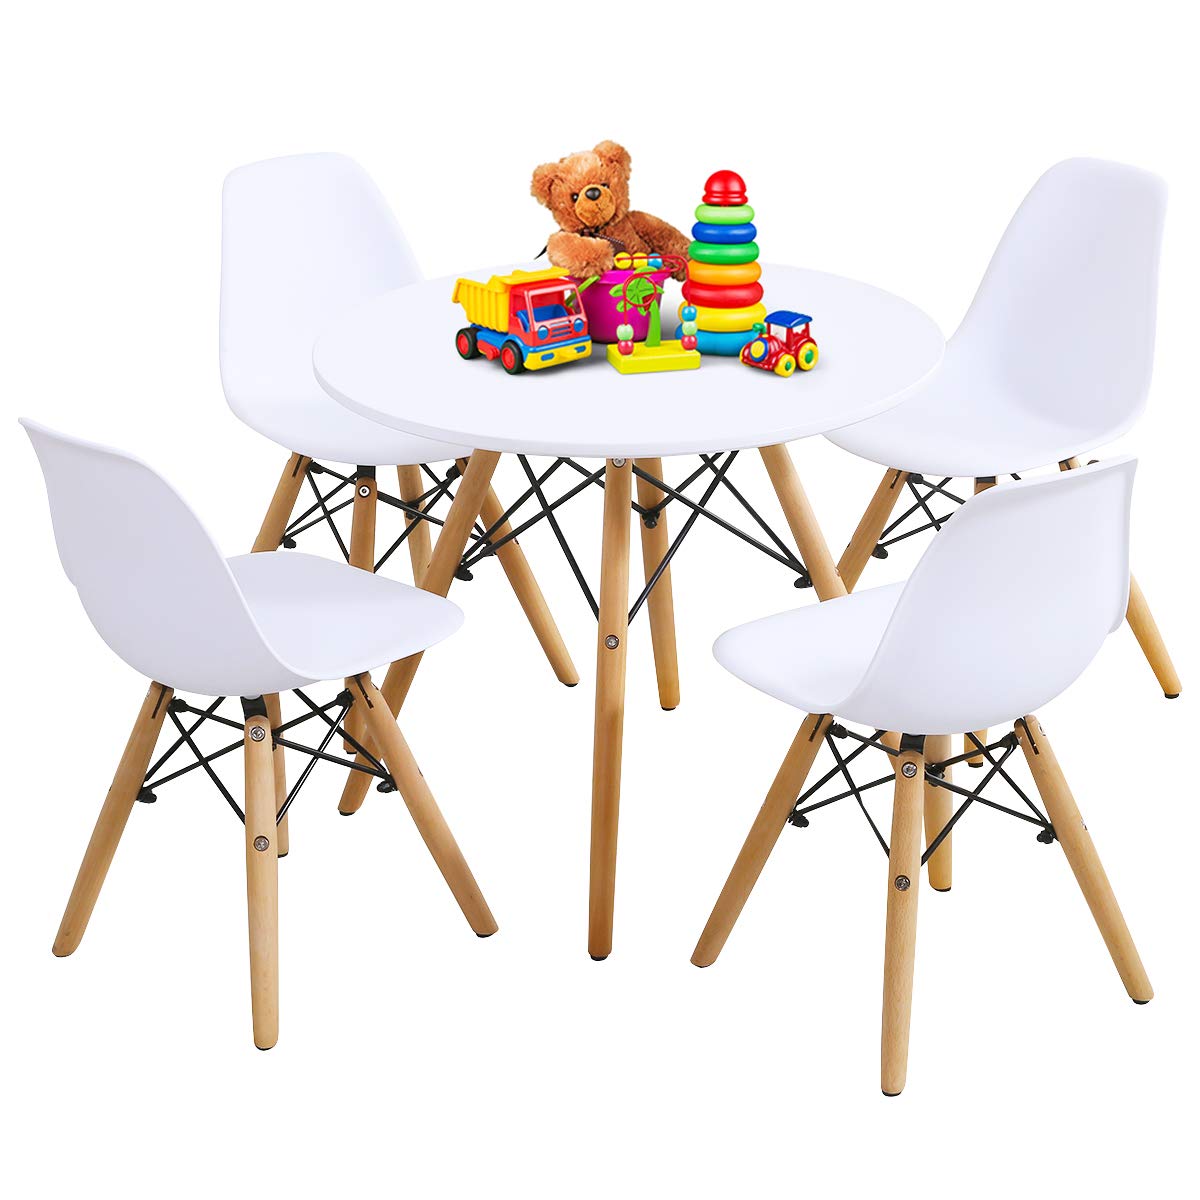 Costzon Kids Table and Chair Set, Kids Mid-Century Modern Style Table Set for Toddler Children, Kids Dining Table and Chair Set, 5-Piece Set